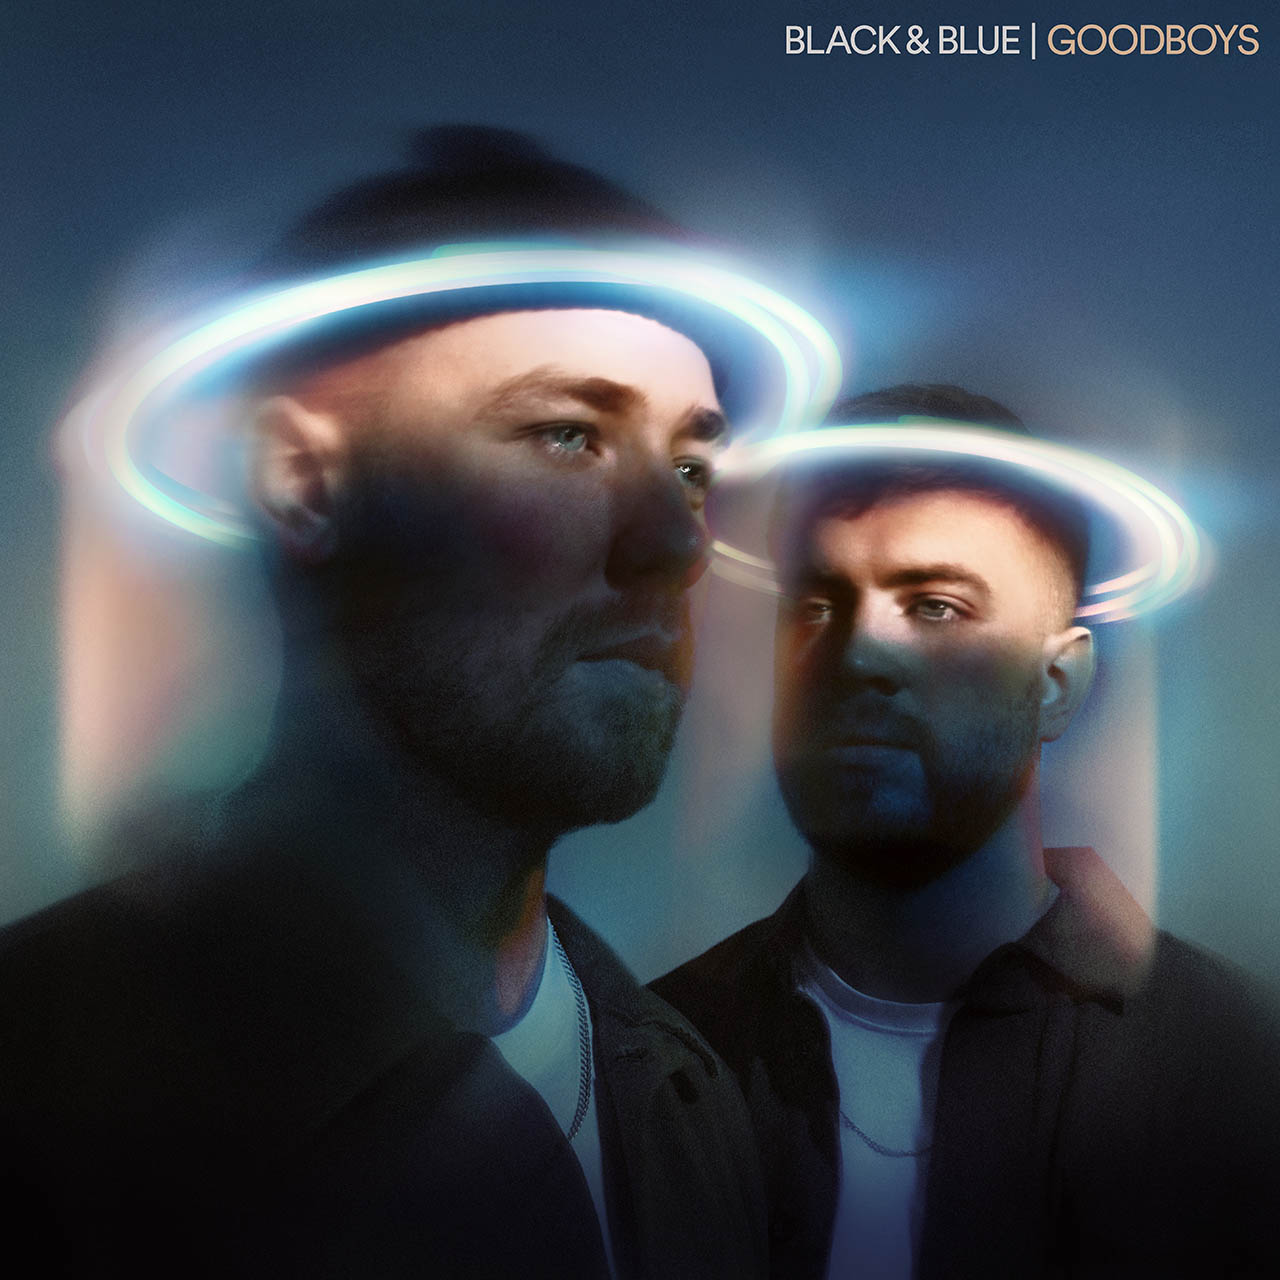 Black and Blue - The Goodboys